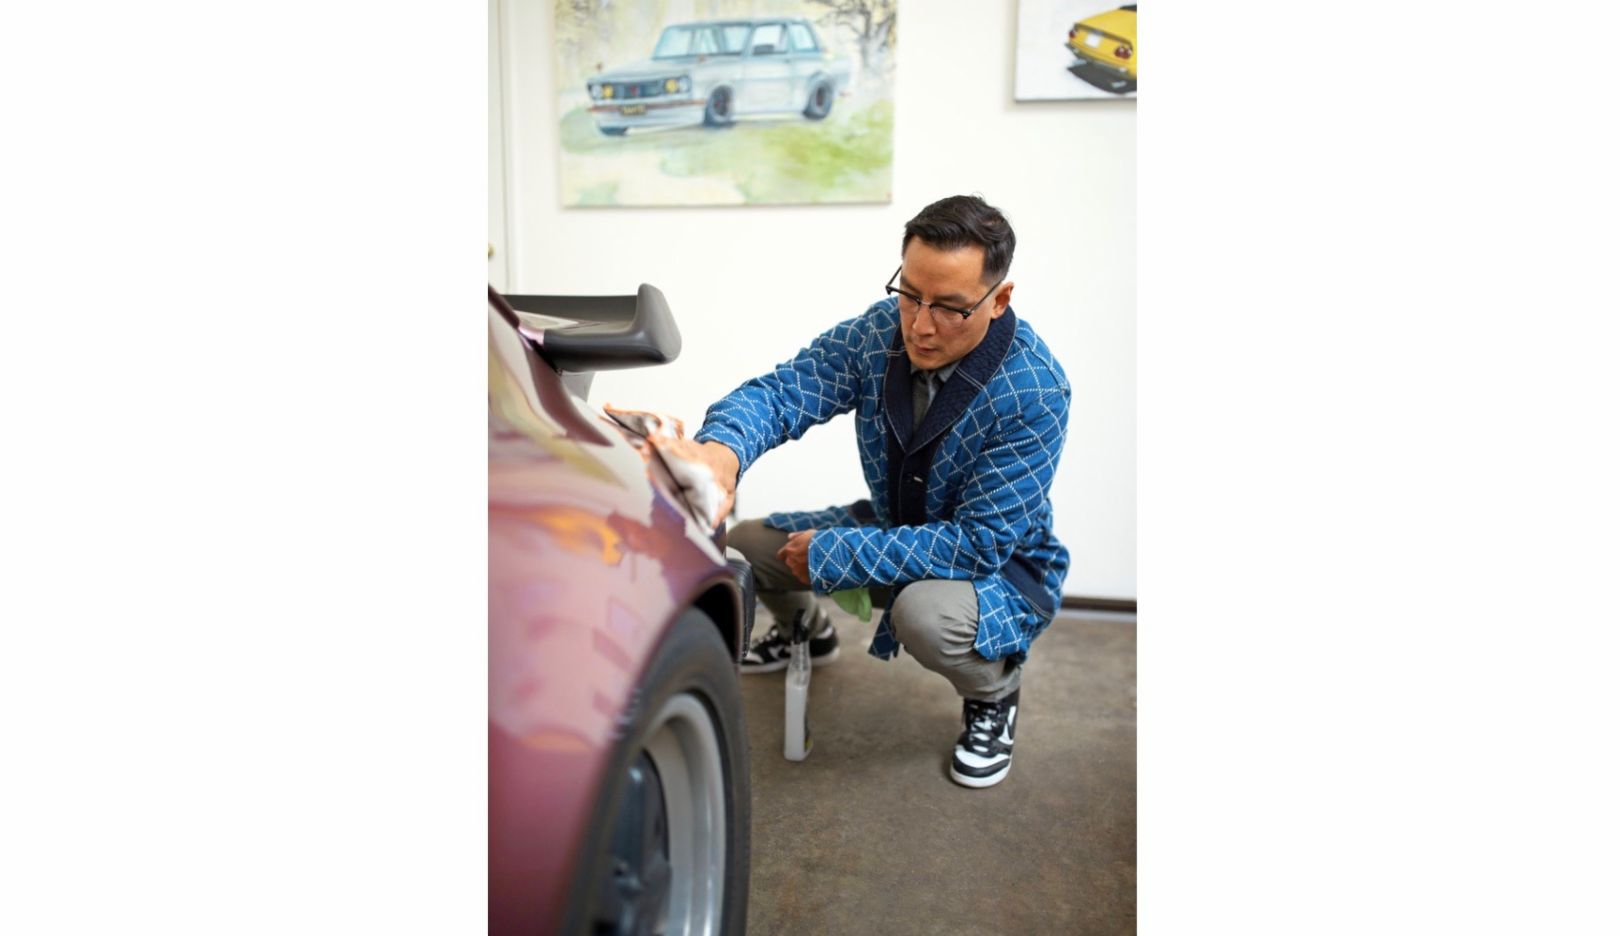 Daniel Wu took the Porsche 911 built in 1988 off his father’s hands ten years ago and has cherished it ever since. Father and son share many memories of the sports car.